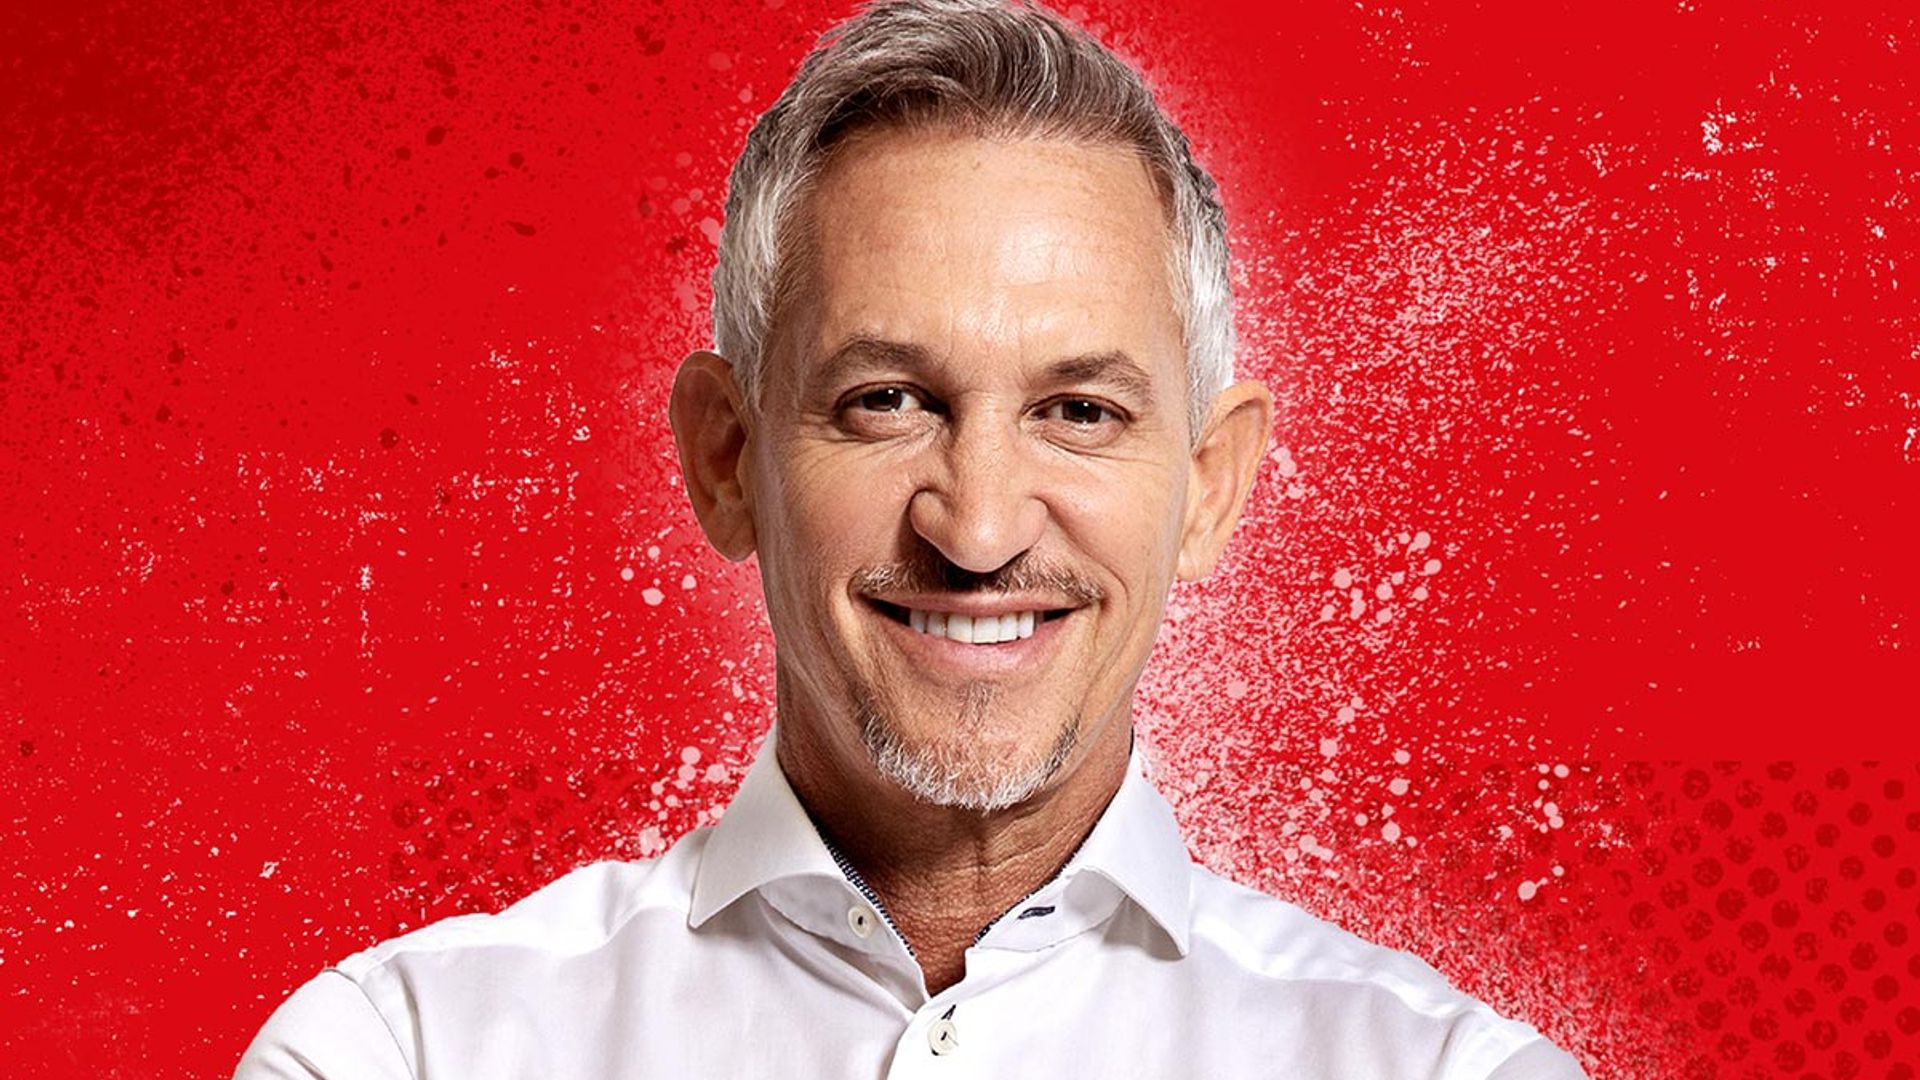 Gary Lineker's incredible garden has to be seen to be believed